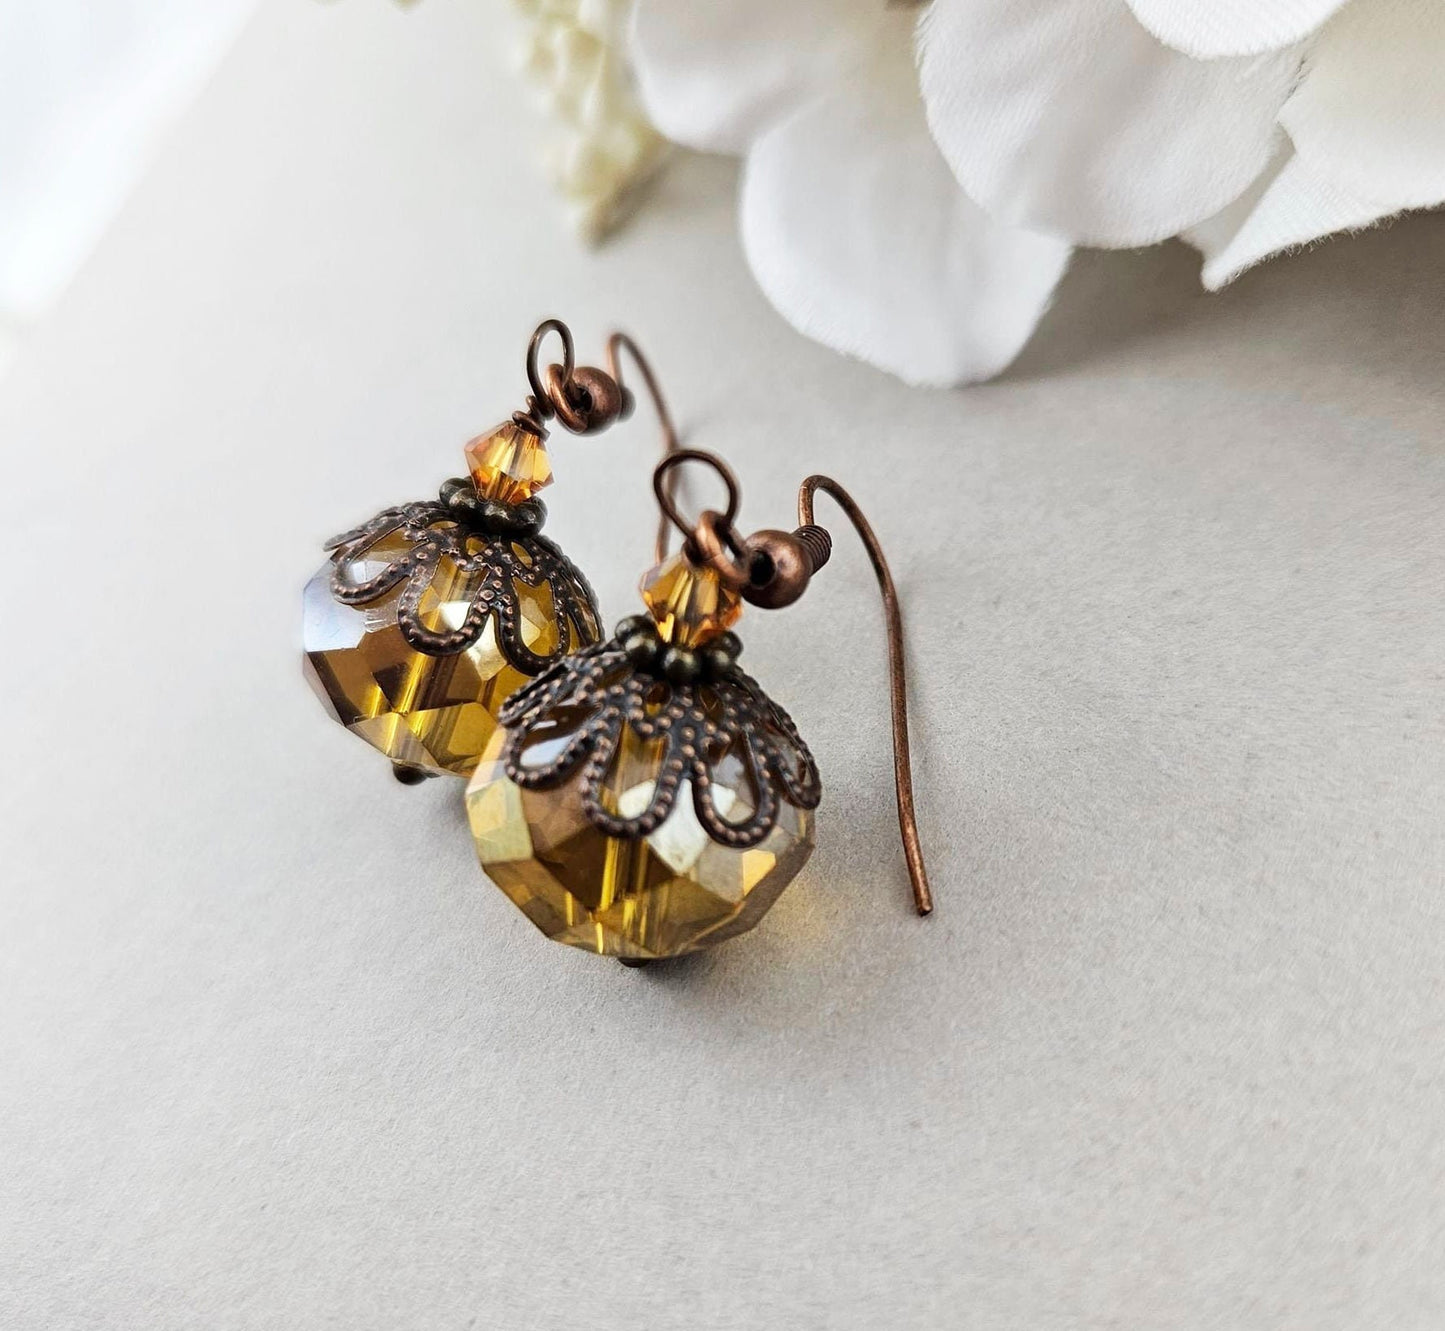 Topaz Dangle Drop Earrings, Vintage Inspired Beaded Glass Jewelry, Gift for Her